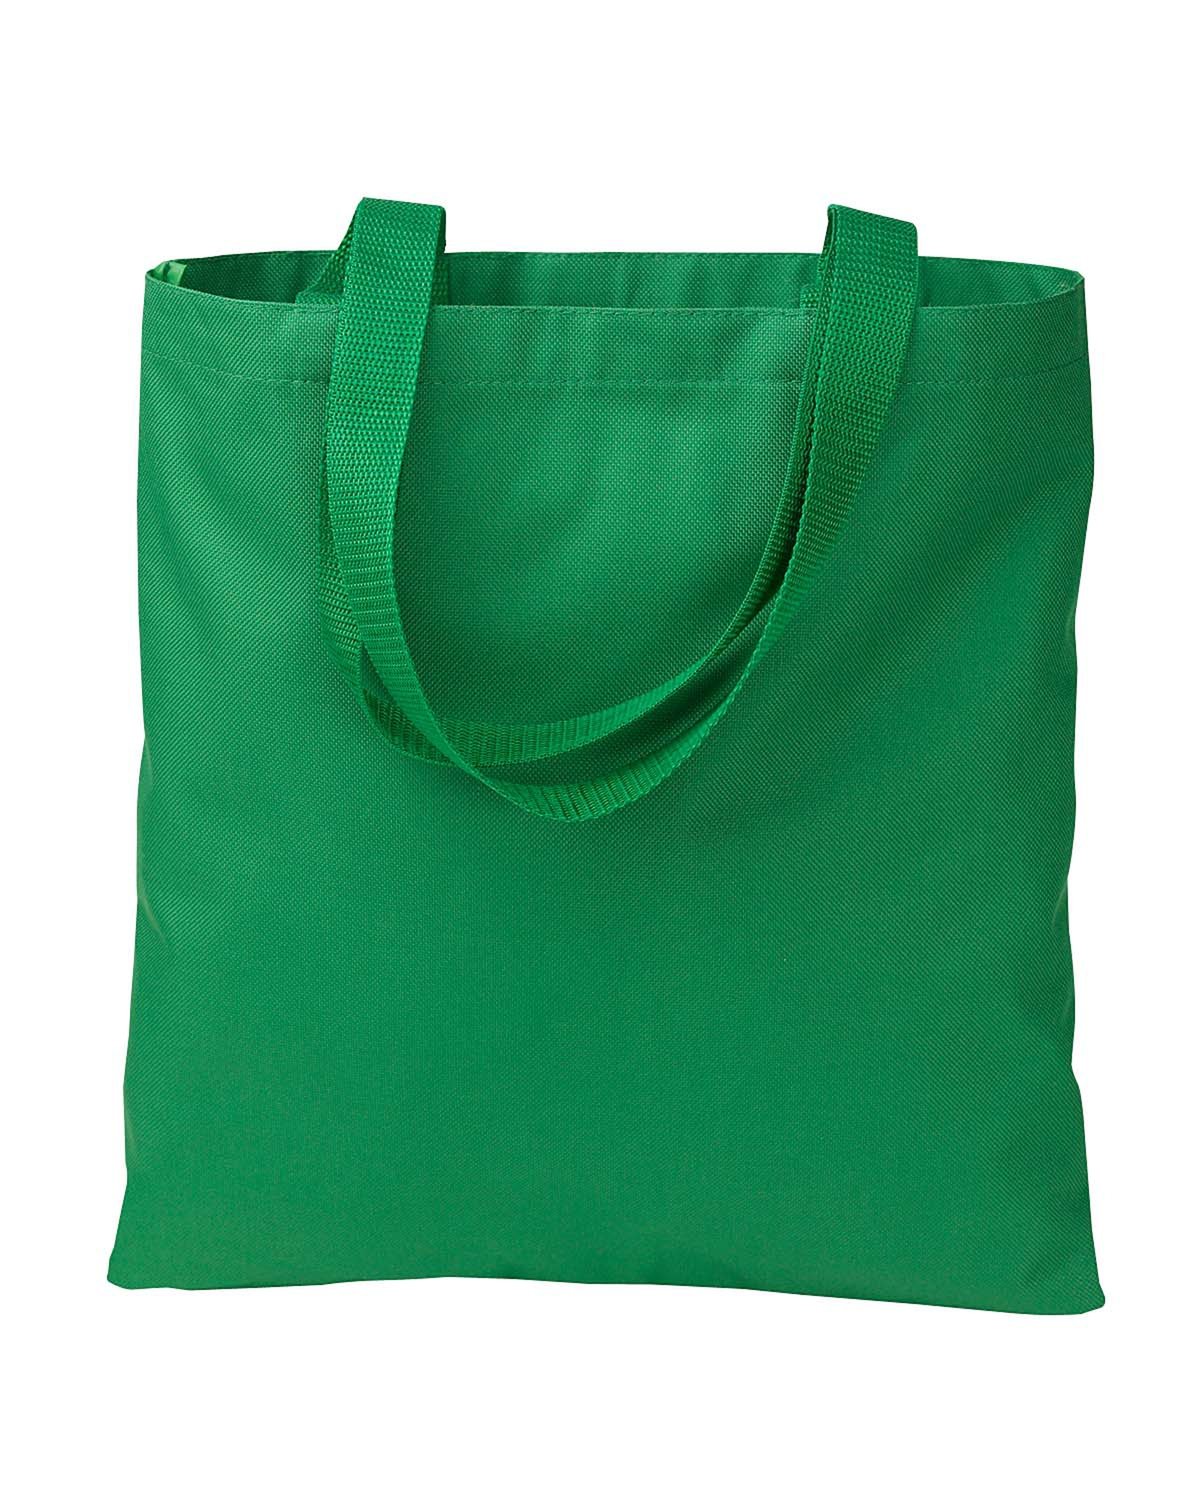 Bags and Accessories KELLY GREEN OS Liberty Bags